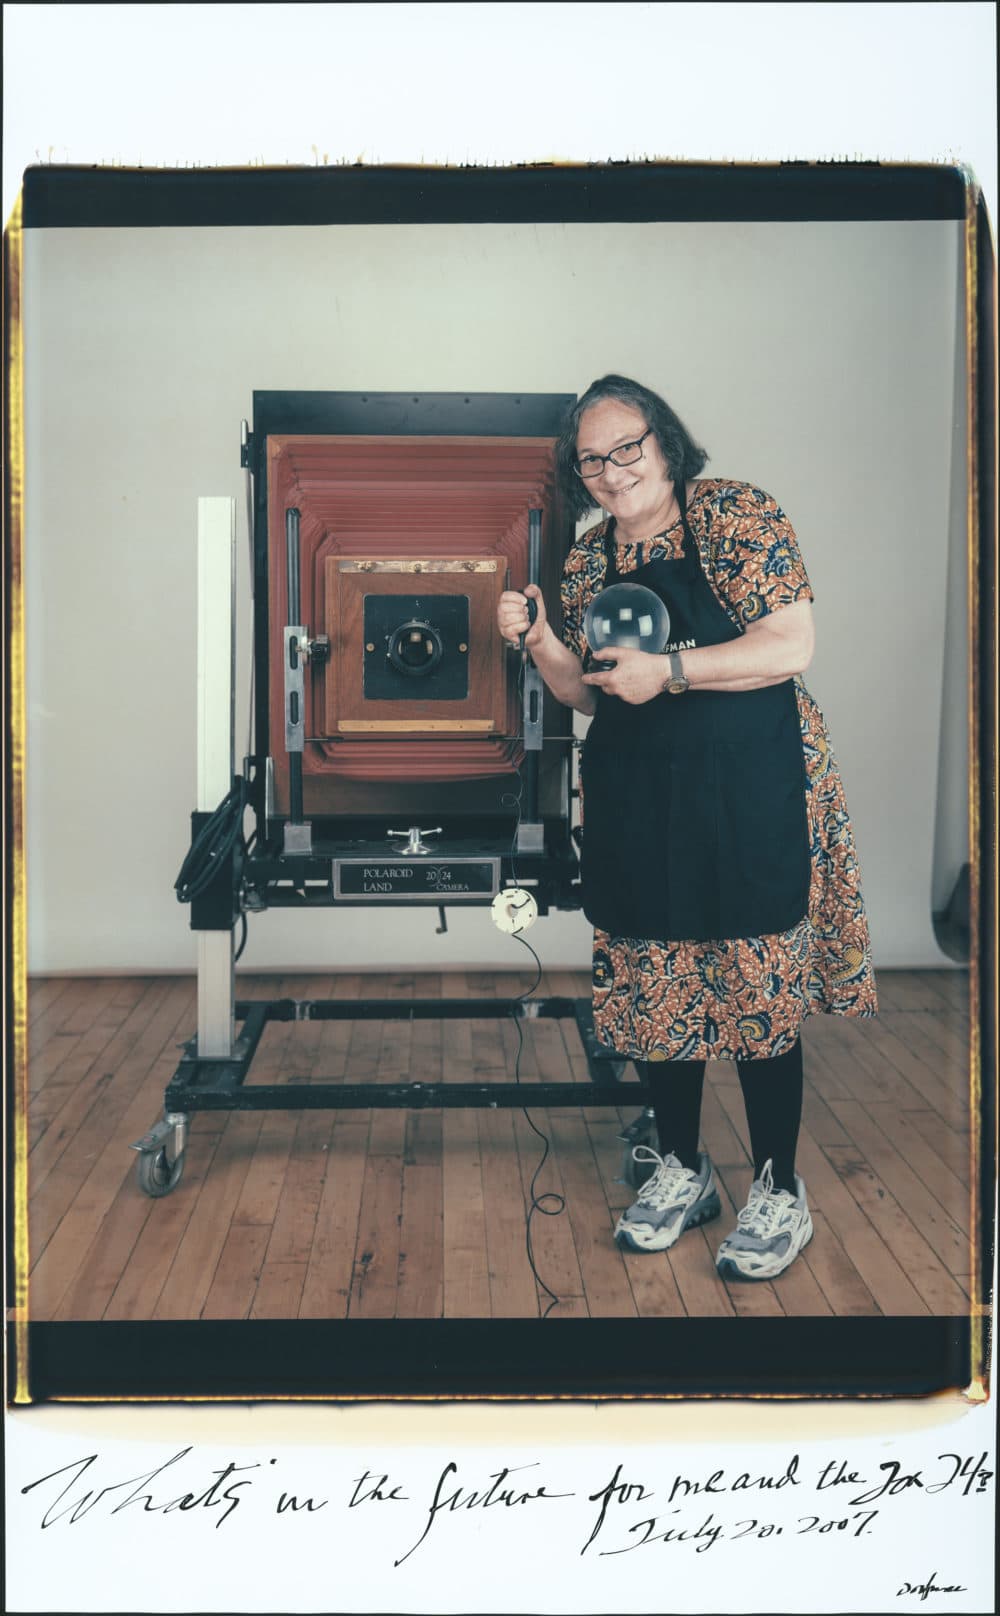 Elsa Dorfman, "What's in the future for me and the 20x24?" July 20, 2007 (Courtesy Museum of Fine Arts)